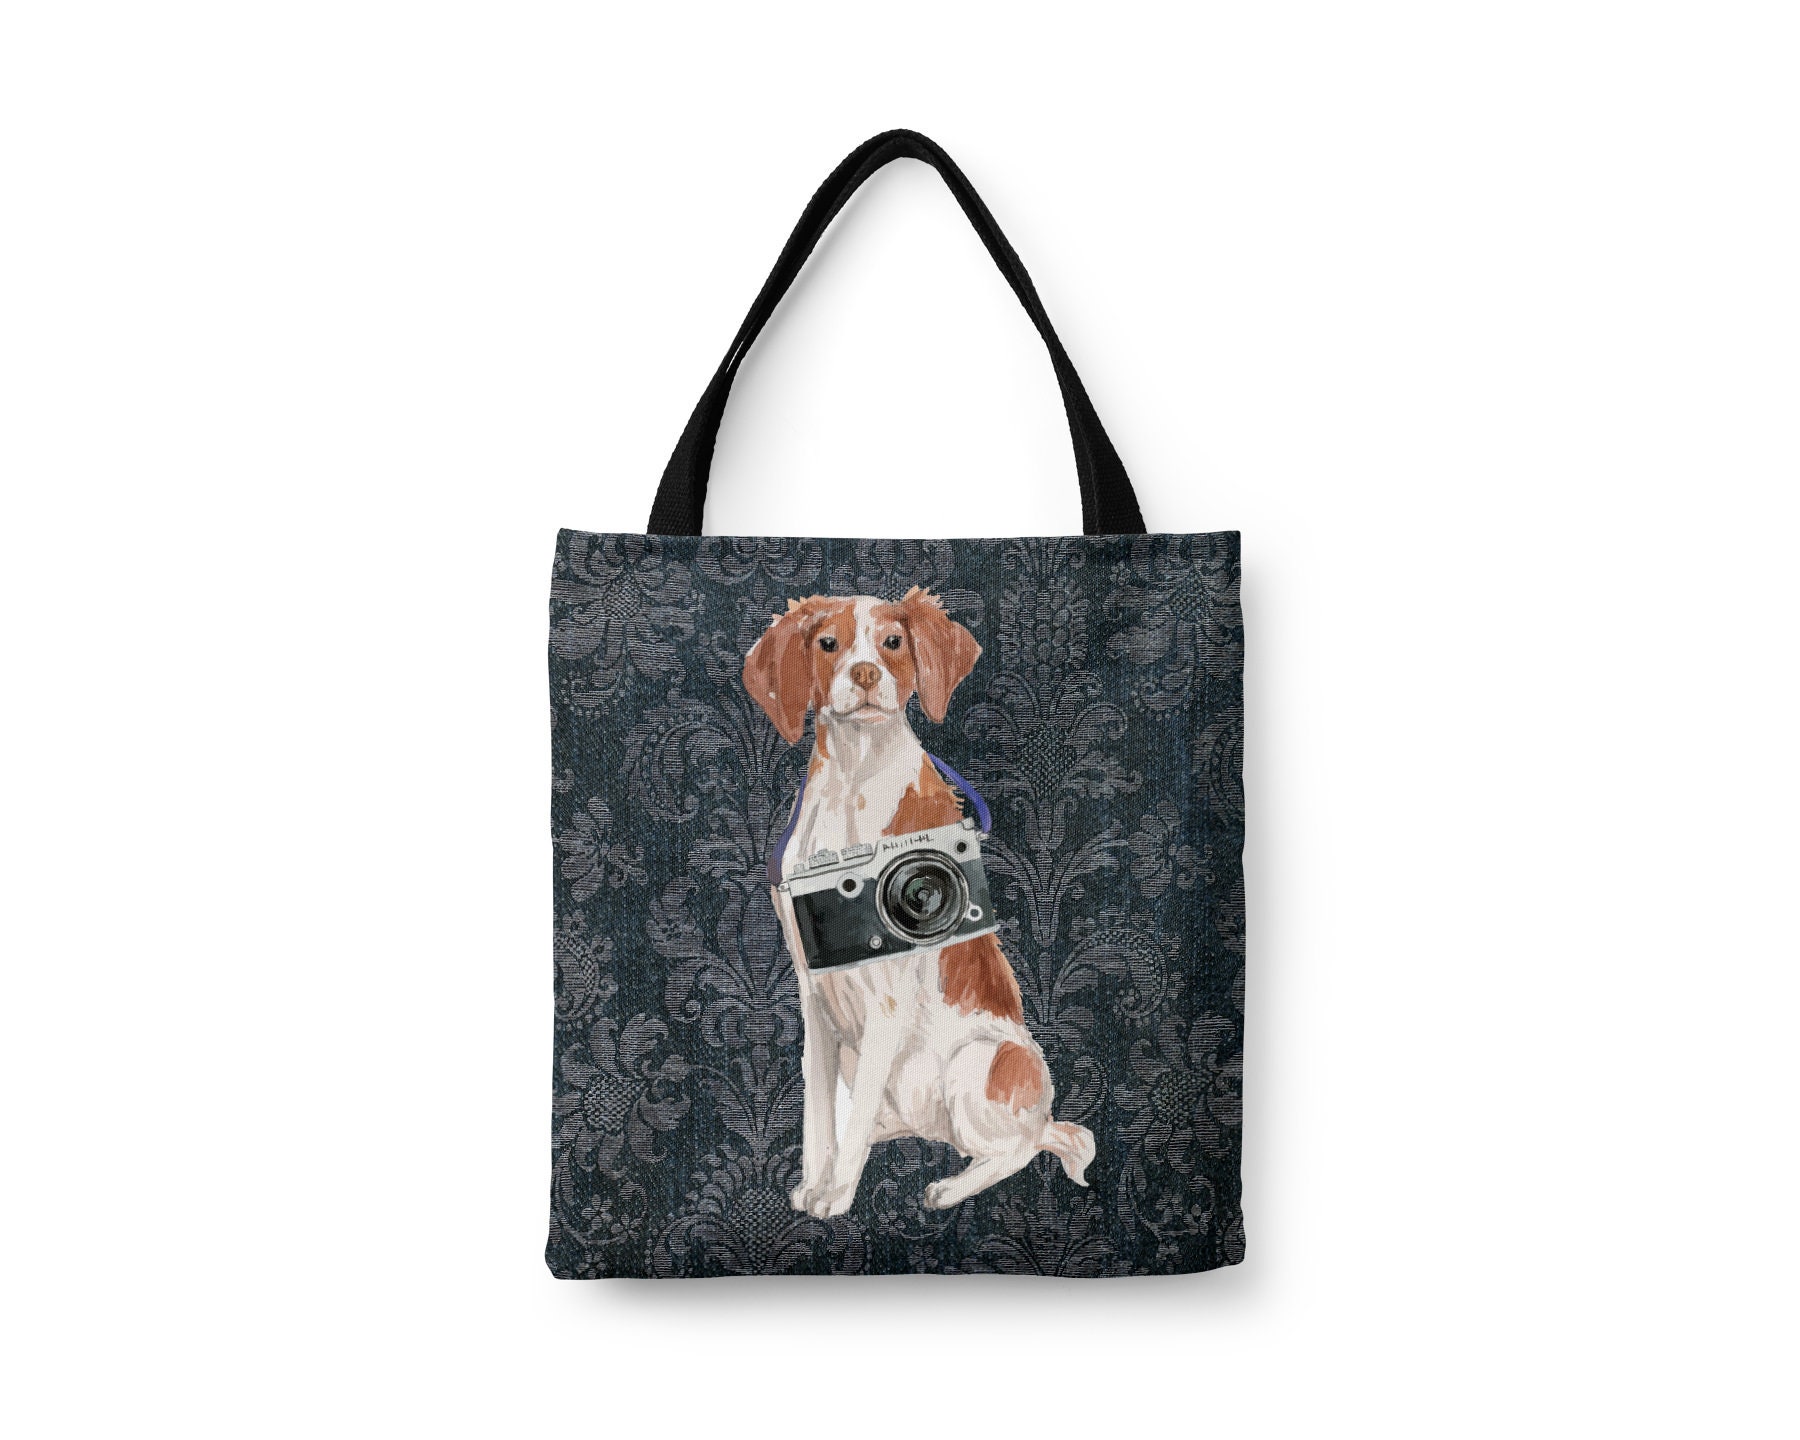 Brittany Dog Tote Bag - Illustrated Dogs & 6 Denim Inspired Styles. All Purpose Ideal For Shopping, Laptop... Spaniel, Wiegref, Epagneul